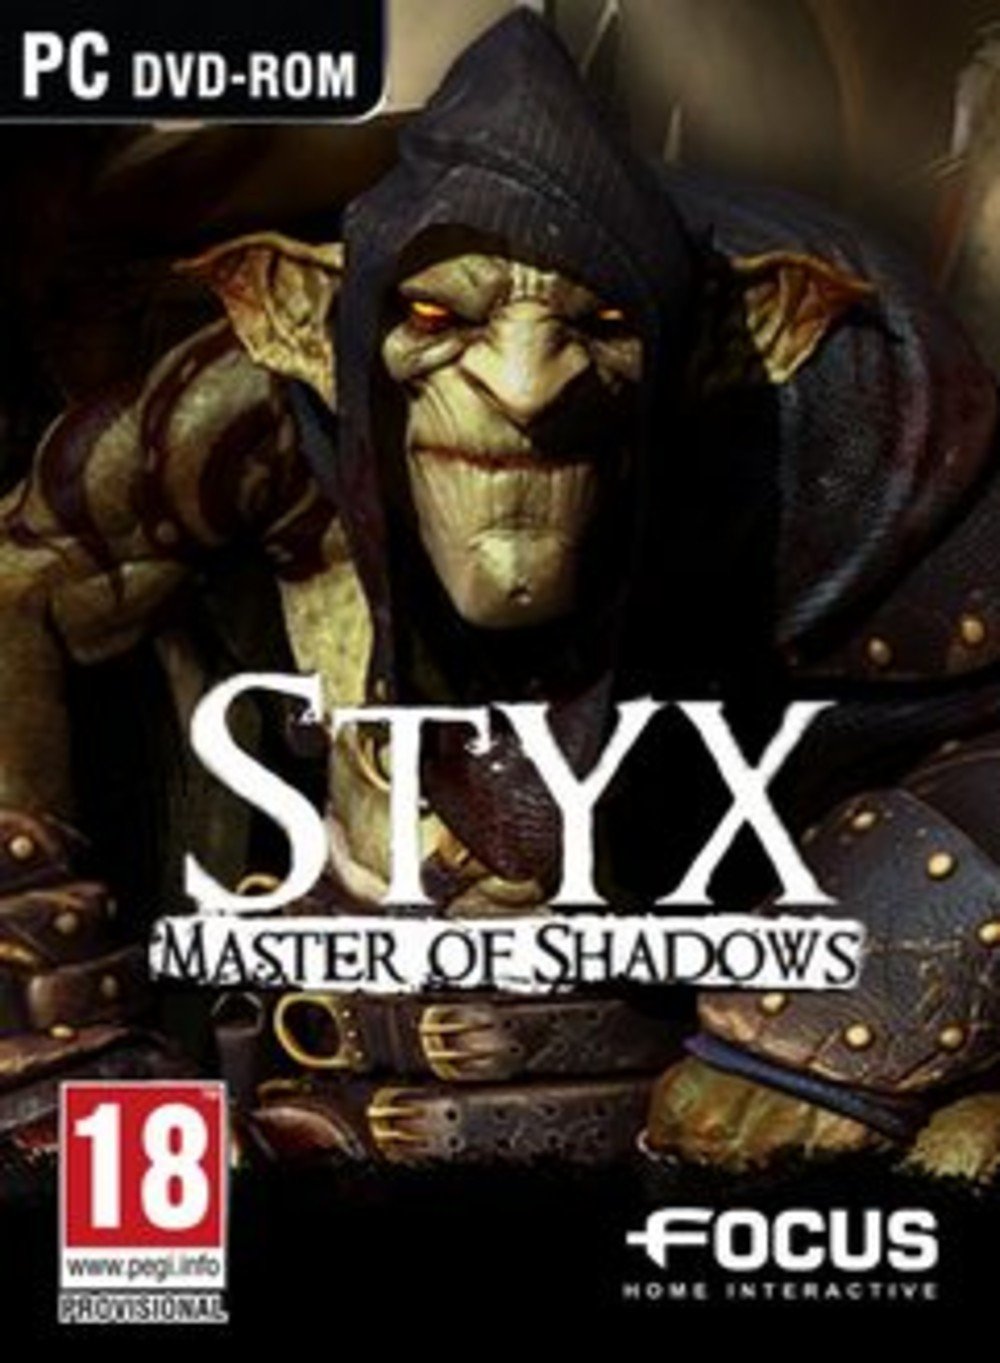 download ps4 styx